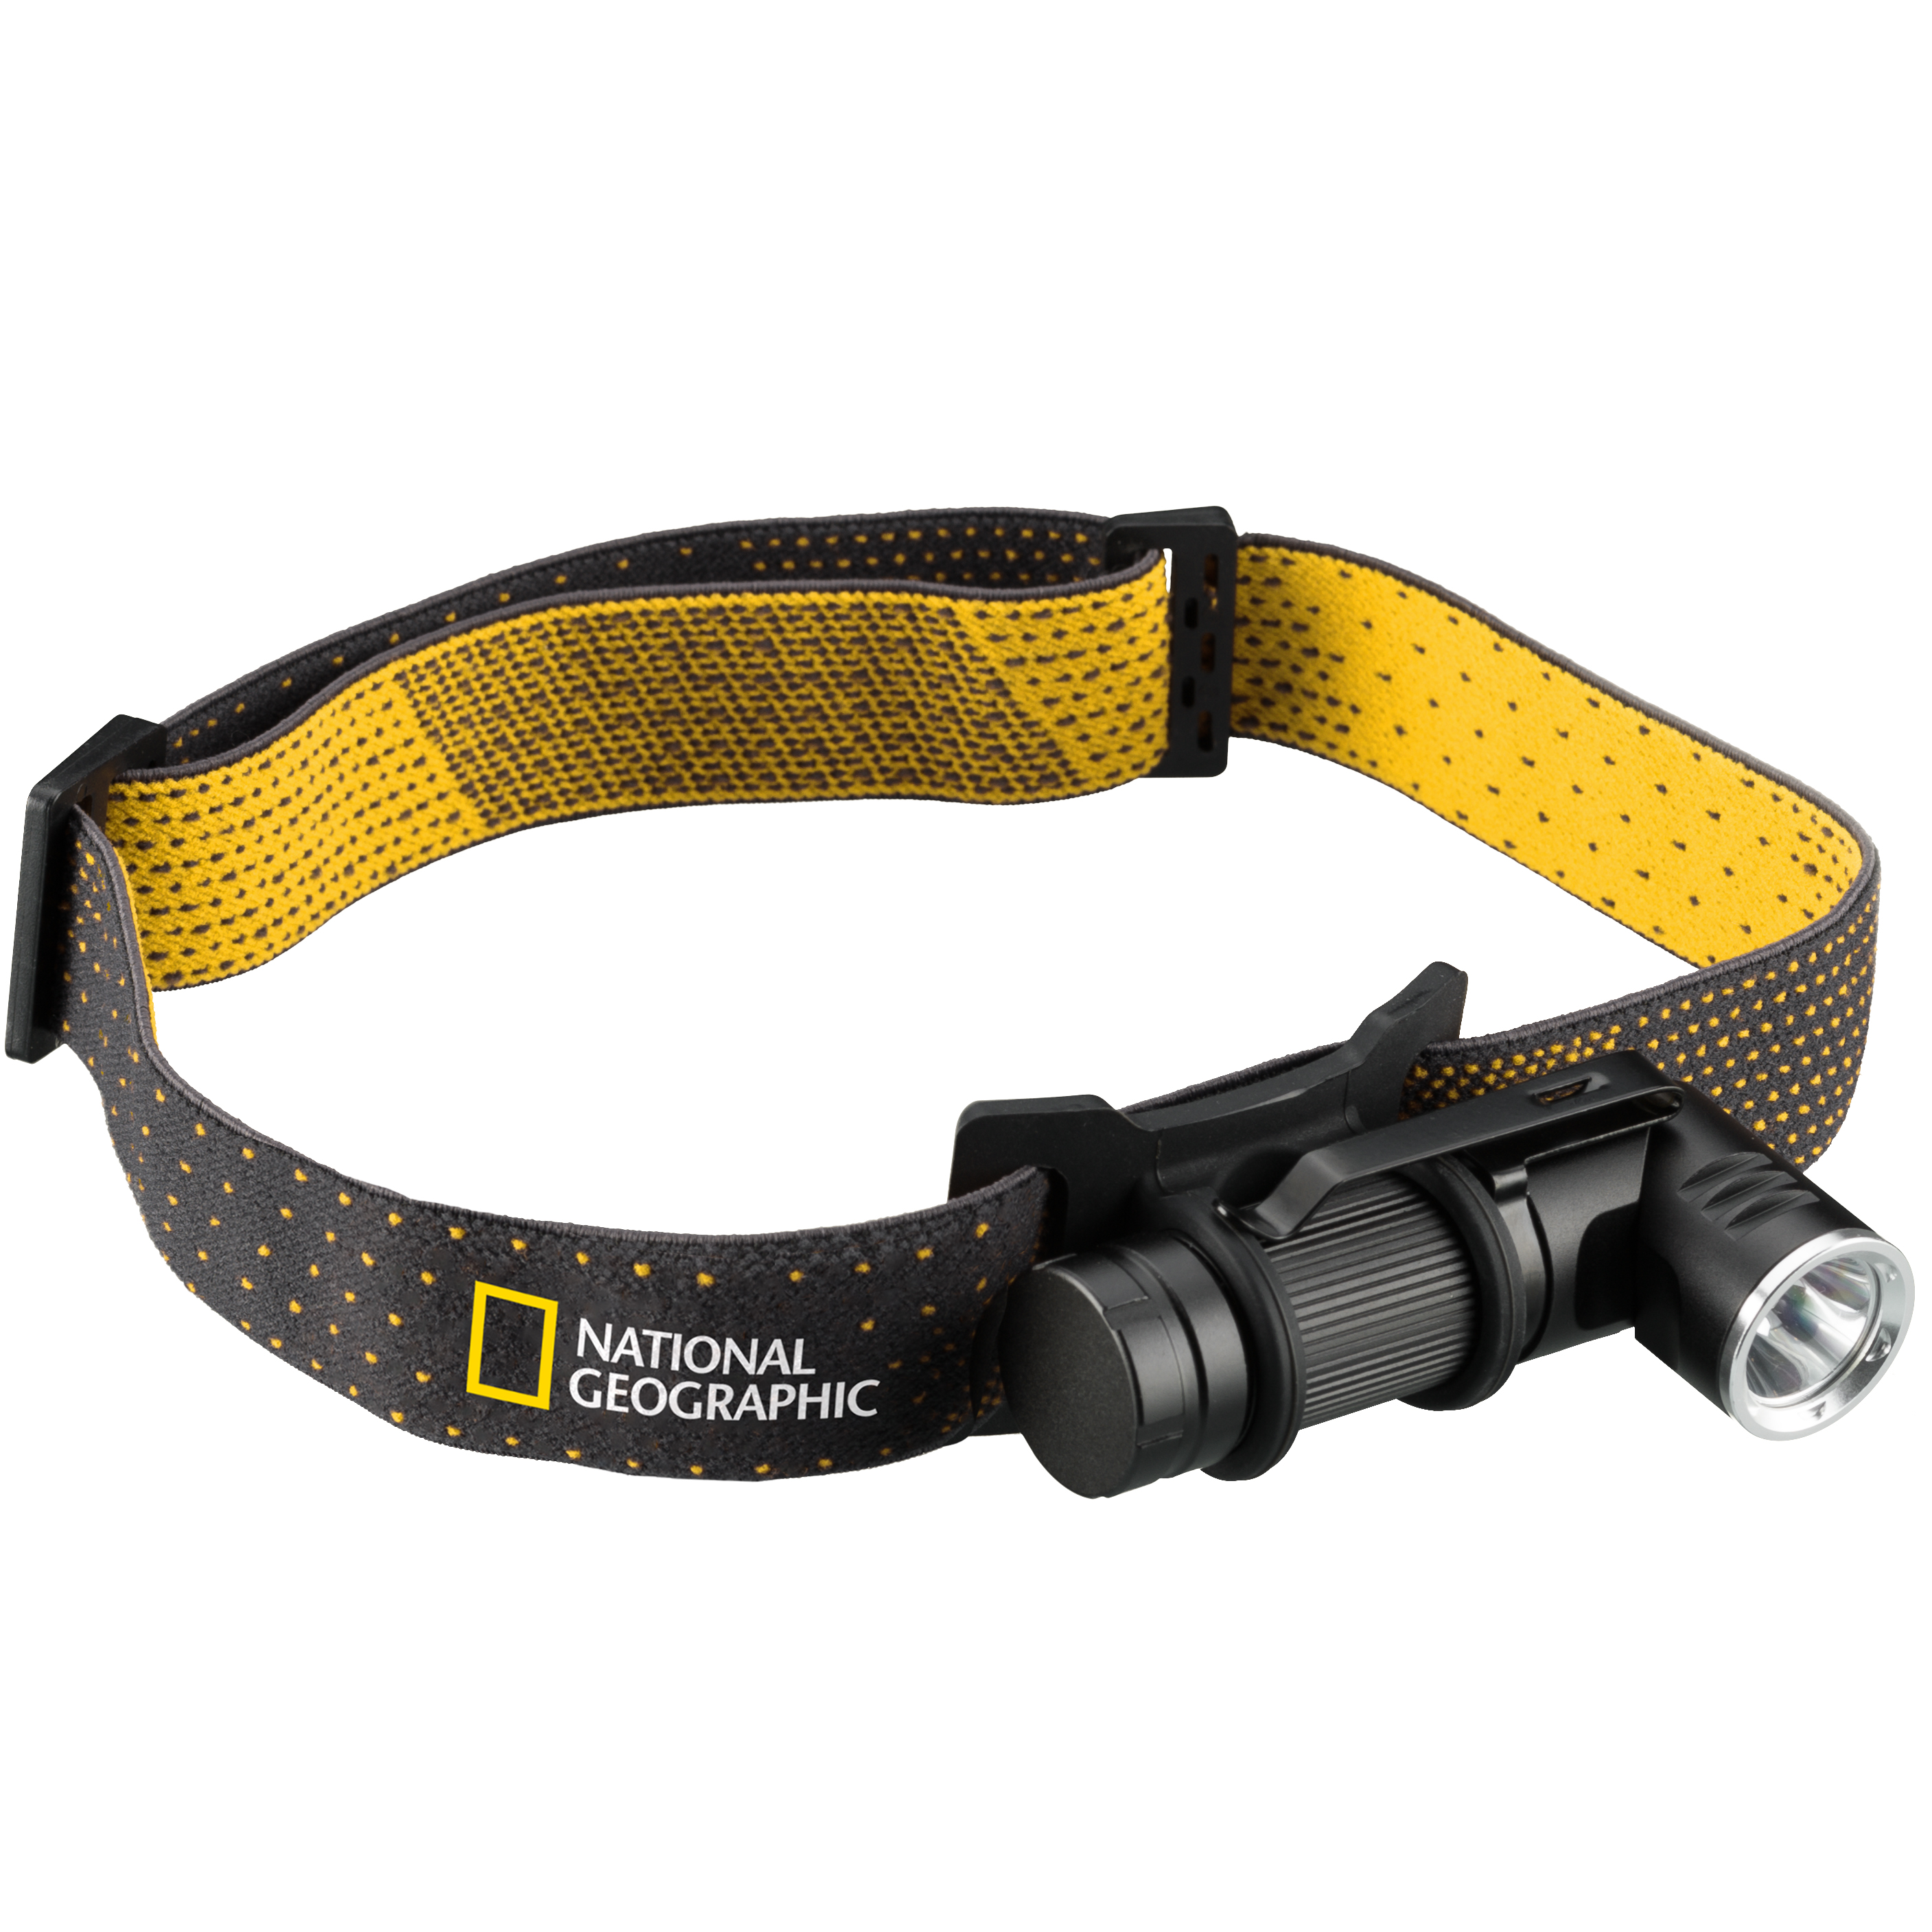 Torcia LED ILUMINOS NATIONAL GEOGRAPHIC 450 450 lm con supporto testa